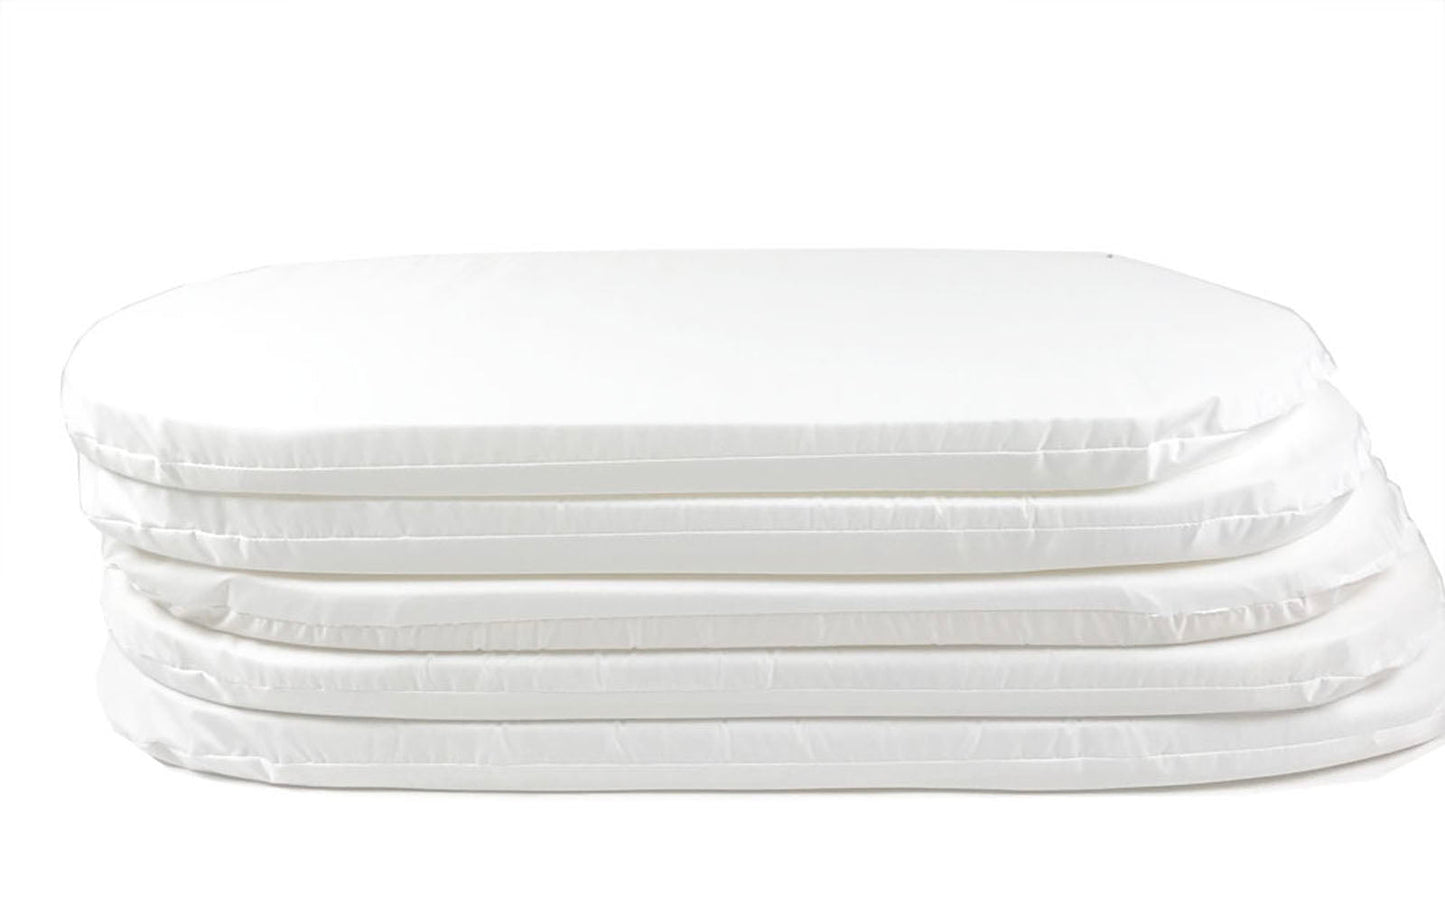 Covered Foam Mattress Pad - 1.5 inches Thick - Wrapped in Waterproof Material - Custom Made Size and Shape